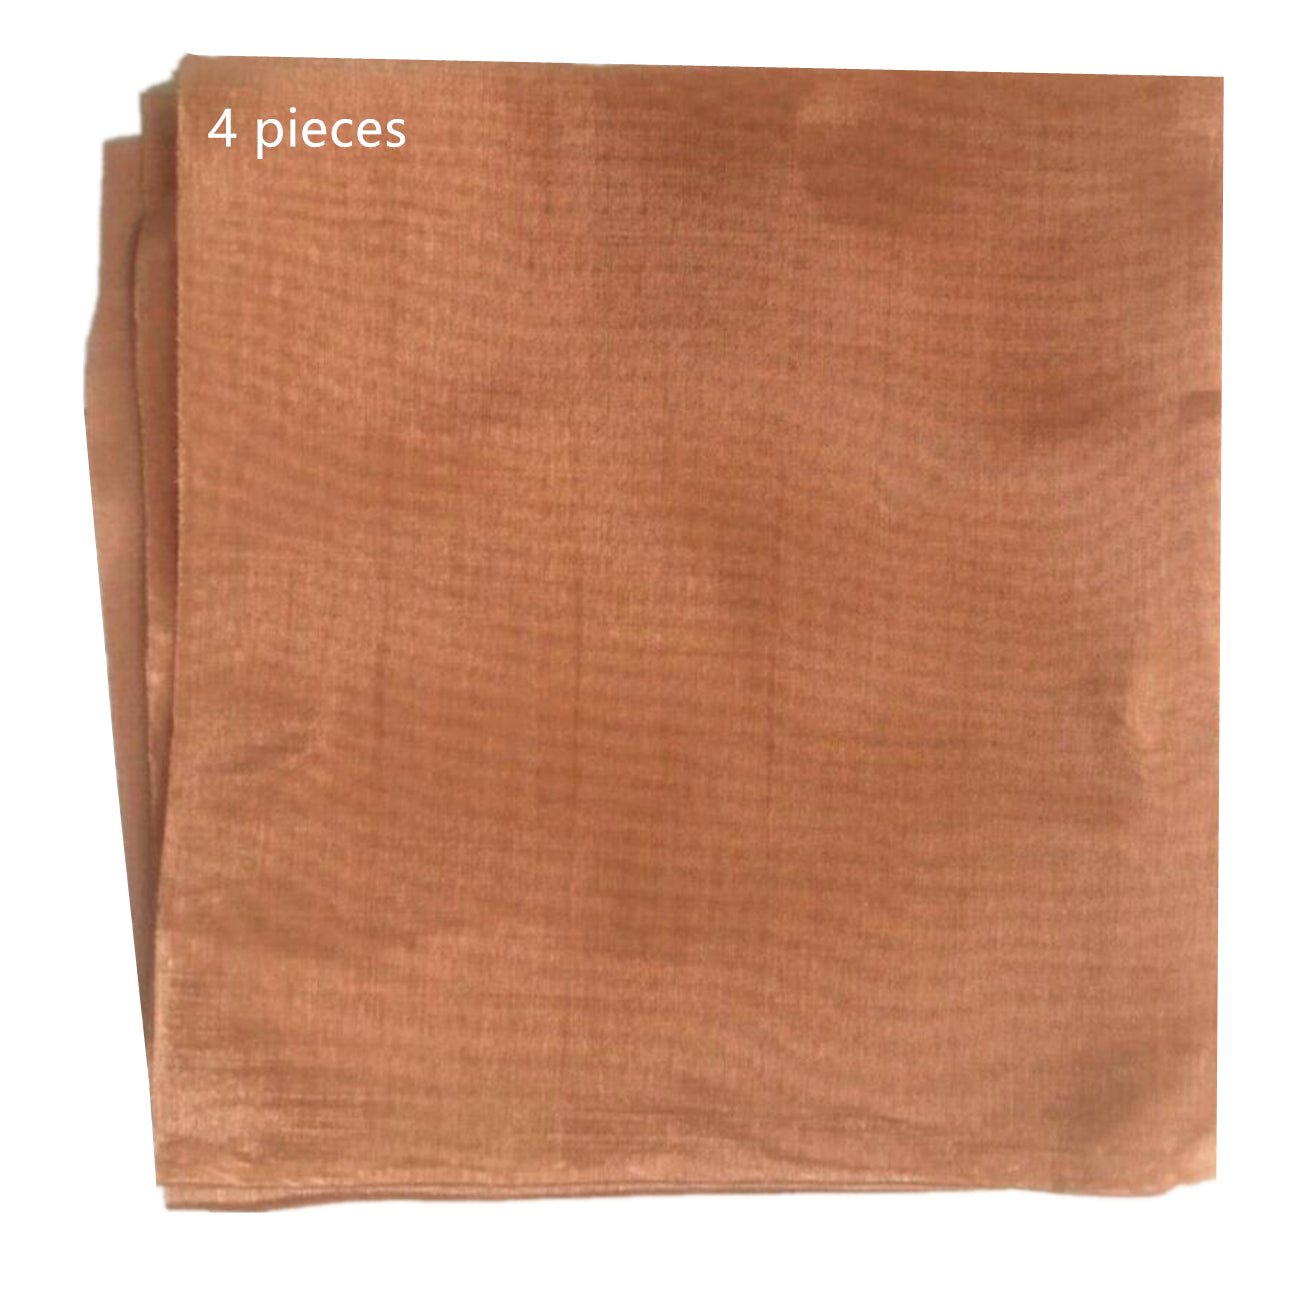 Pure Copper Mesh Dense Filter Virus Proof Anti Bacteria Breathable Fabric Sheets for Mask